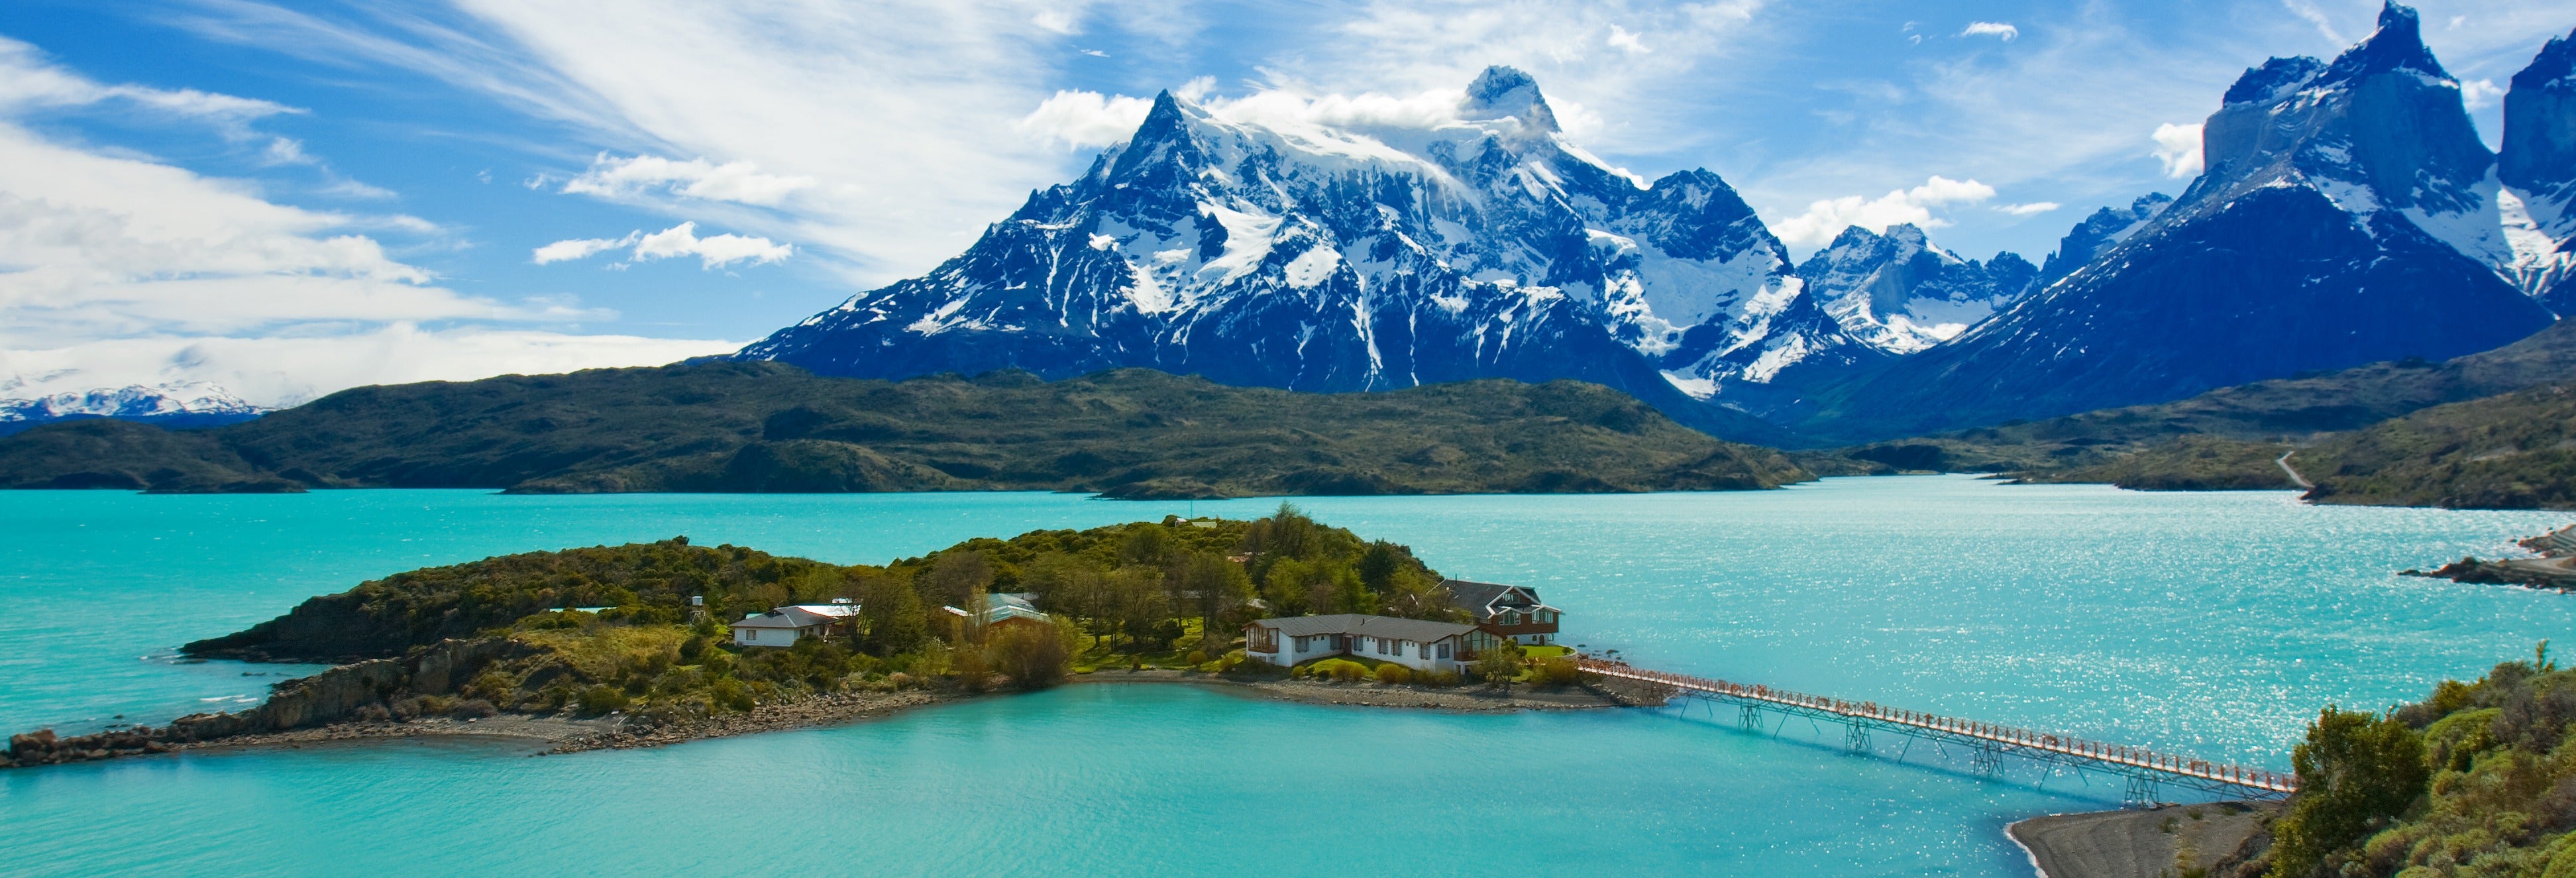 Tour packages to Torres del Paine National Park from USA